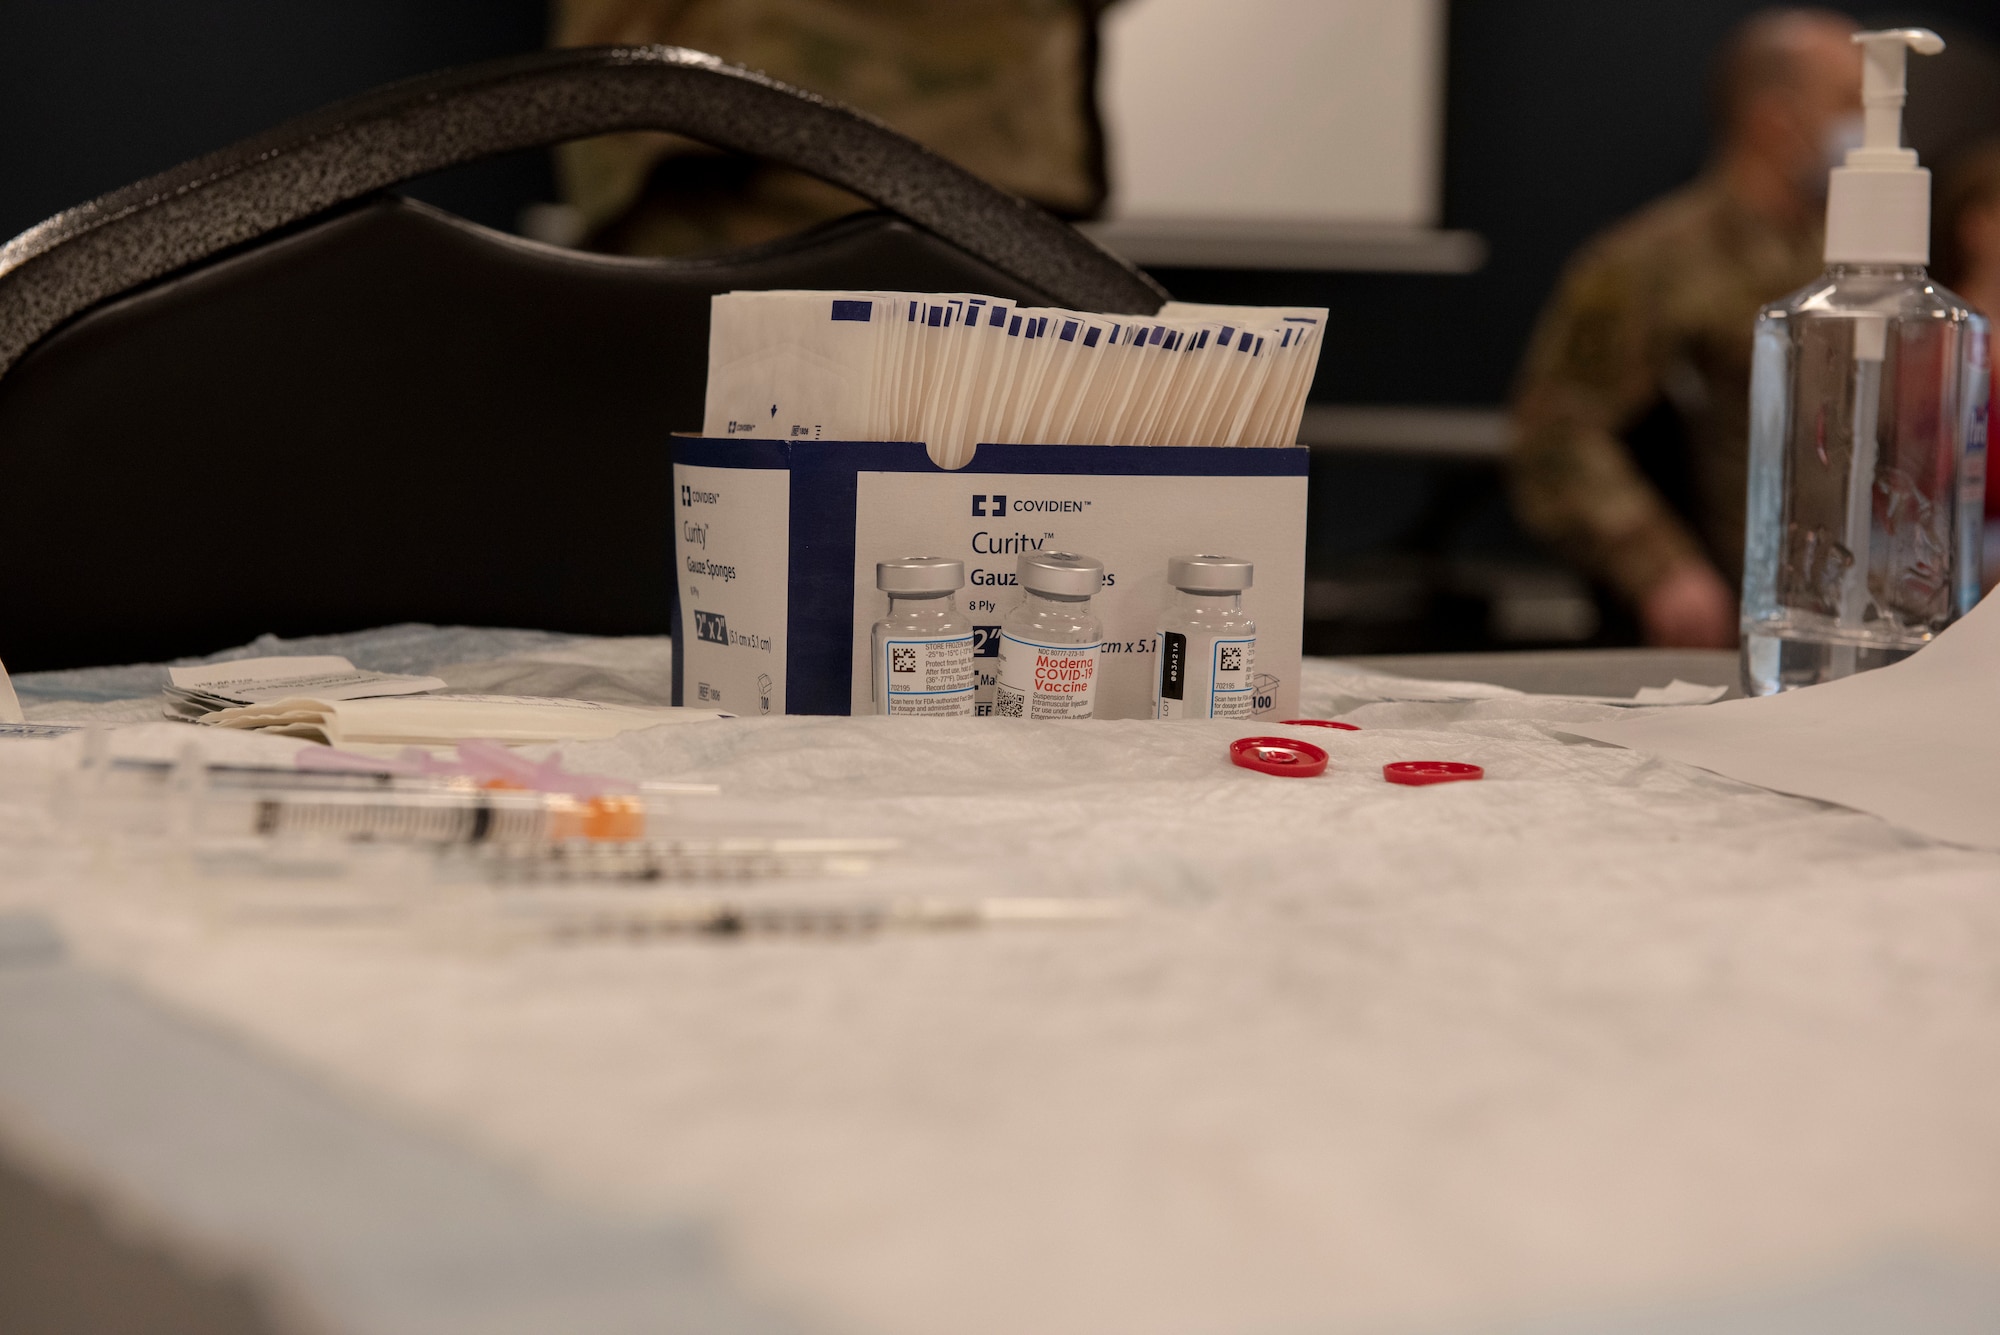 COVID-19 vaccines lay ready to be administered to members of the 701st Munitions Maintenance Squadron at Kleine Brogel Air Base, Belgium, March 19, 2021. To date, the independent duty medical technician assigned to the 701st MUNSS has been able to offer the COVID-19 vaccine to 100% of active duty service members and their dependents over the age of 18. (U.S. Air Force photo by Capt. Erin Recanzone)